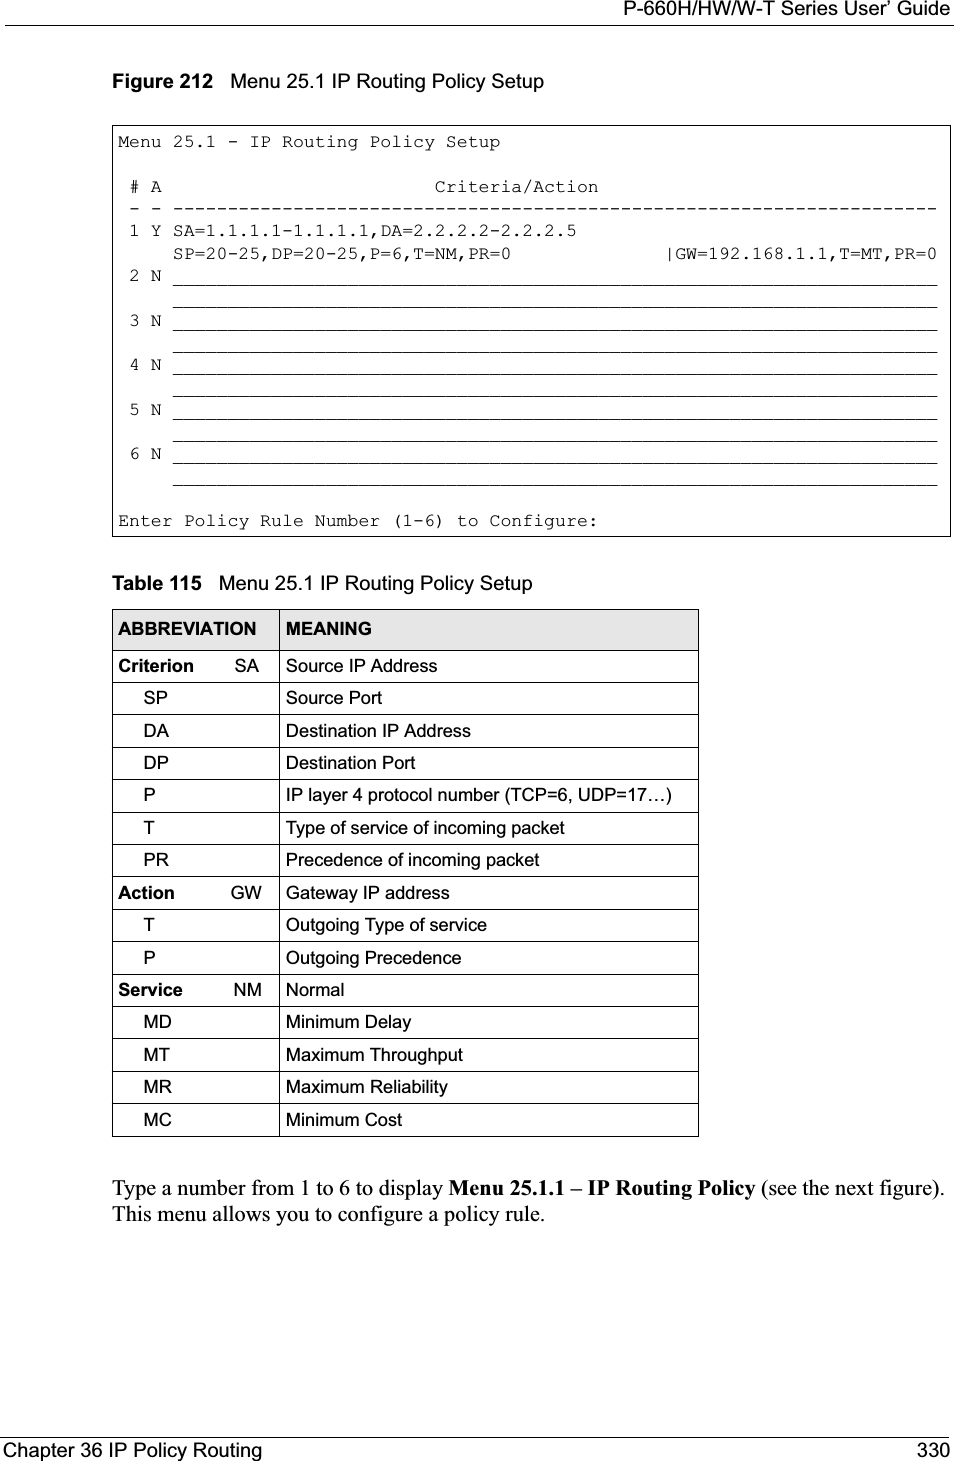 P-660H/HW/W-T Series User’ GuideChapter 36 IP Policy Routing 330Figure 212   Menu 25.1 IP Routing Policy SetupType a number from 1 to 6 to display Menu 25.1.1 – IP Routing Policy (see the next figure).This menu allows you to configure a policy rule.Menu 25.1 - IP Routing Policy Setup # A                         Criteria/Action - - ---------------------------------------------------------------------- 1 Y SA=1.1.1.1-1.1.1.1,DA=2.2.2.2-2.2.2.5     SP=20-25,DP=20-25,P=6,T=NM,PR=0              |GW=192.168.1.1,T=MT,PR=0 2 N ______________________________________________________________________     ______________________________________________________________________ 3 N ______________________________________________________________________     ______________________________________________________________________ 4 N ______________________________________________________________________     ______________________________________________________________________ 5 N ______________________________________________________________________     ______________________________________________________________________ 6 N ______________________________________________________________________     ______________________________________________________________________Enter Policy Rule Number (1-6) to Configure:Table 115   Menu 25.1 IP Routing Policy SetupABBREVIATION MEANINGCriterion        SA Source IP Address     SP Source Port     DA Destination IP Address     DP Destination Port     P IP layer 4 protocol number (TCP=6, UDP=17…)     T Type of service of incoming packet     PR Precedence of incoming packetAction           GW Gateway IP address     T Outgoing Type of service     P Outgoing PrecedenceService          NM Normal     MD Minimum Delay     MT Maximum Throughput     MR Maximum Reliability     MC Minimum Cost